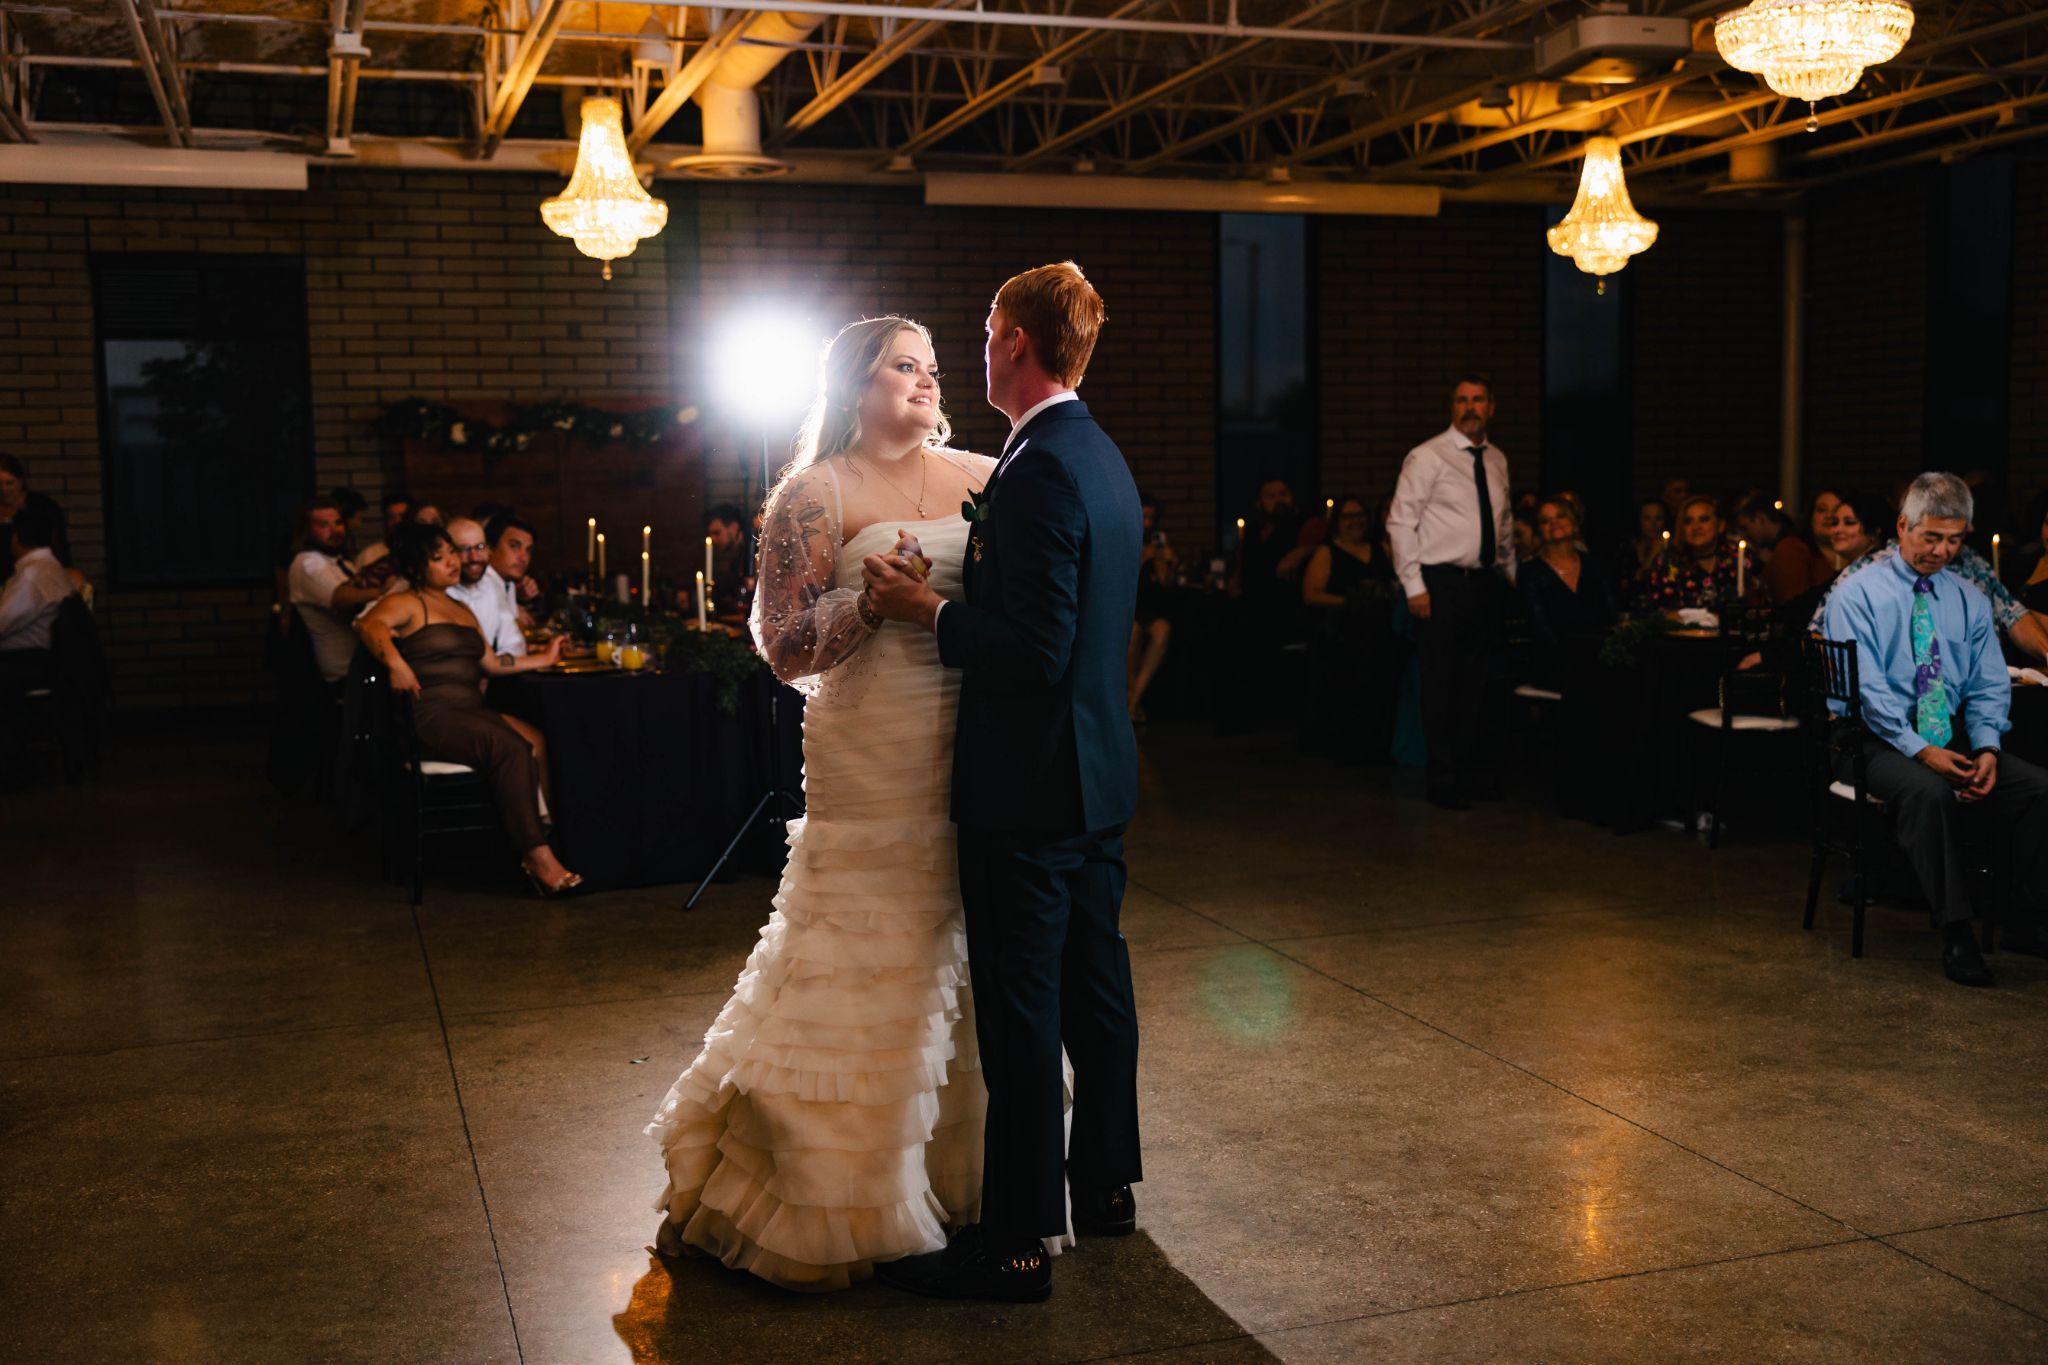 Newlyweds share their first dance at wedding reception, surrounded by love and joy.